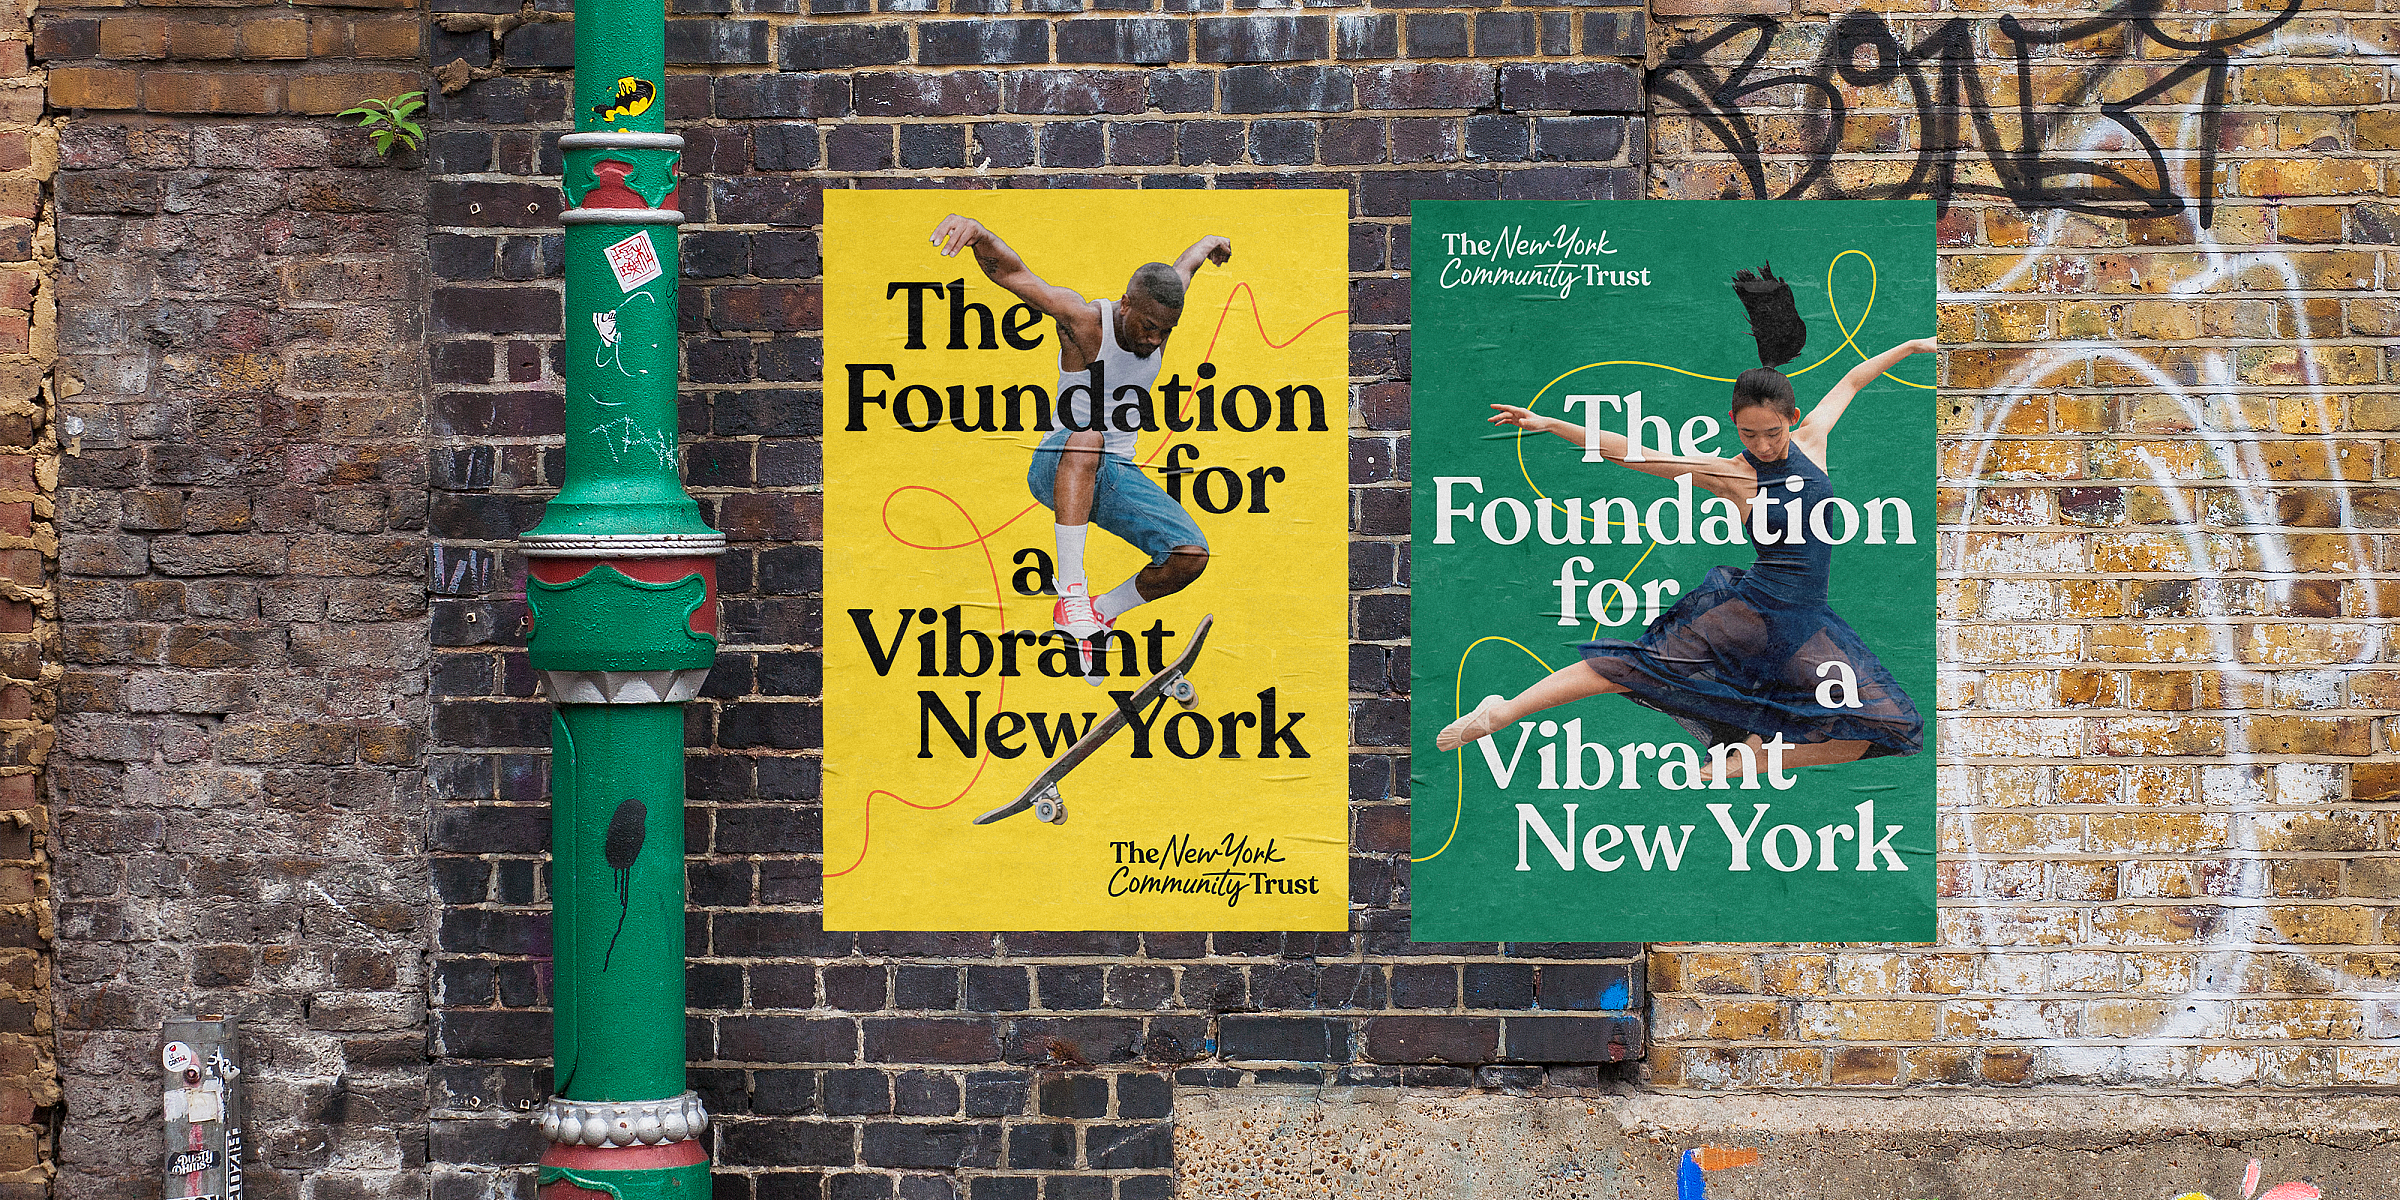 New York Community trust posters mocked up on a graffiti filled brick wall.